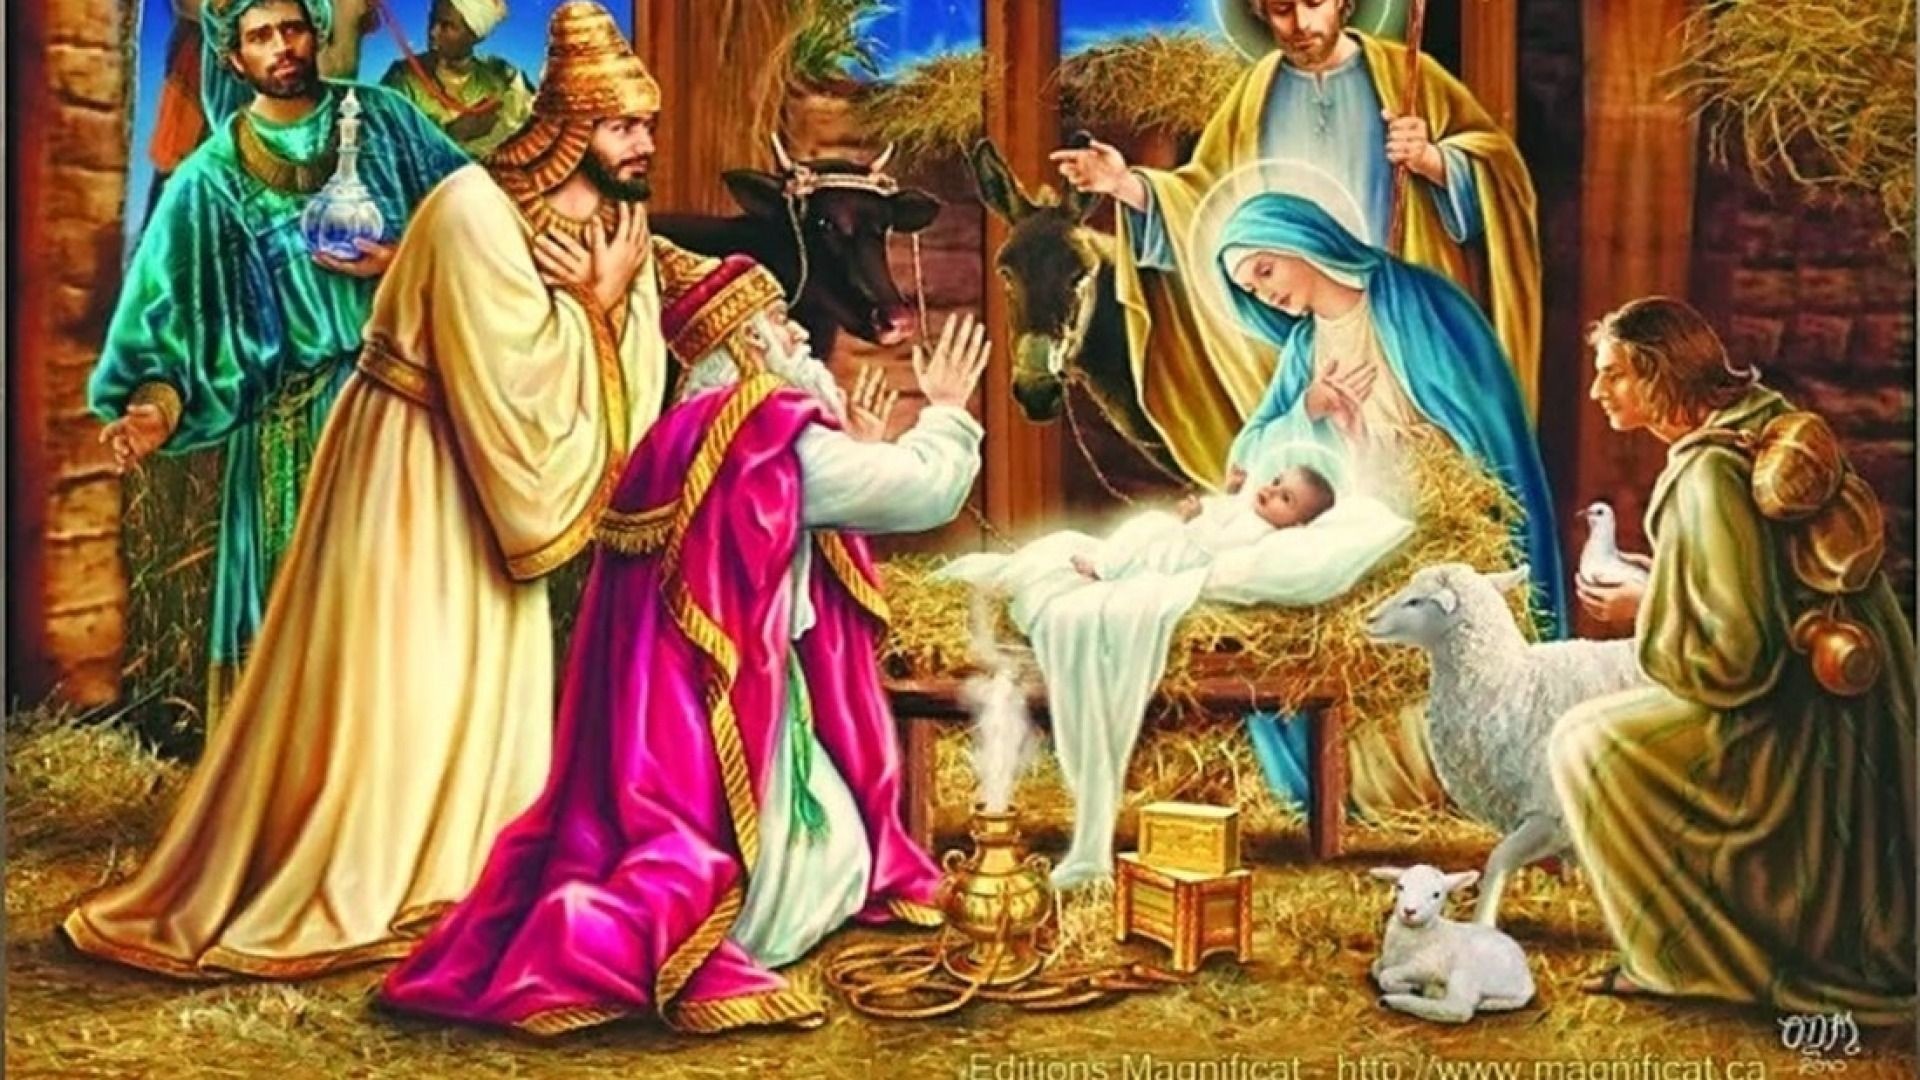 1920x1080, Res - Painting The Birth Of Jesus Christ - HD Wallpaper 